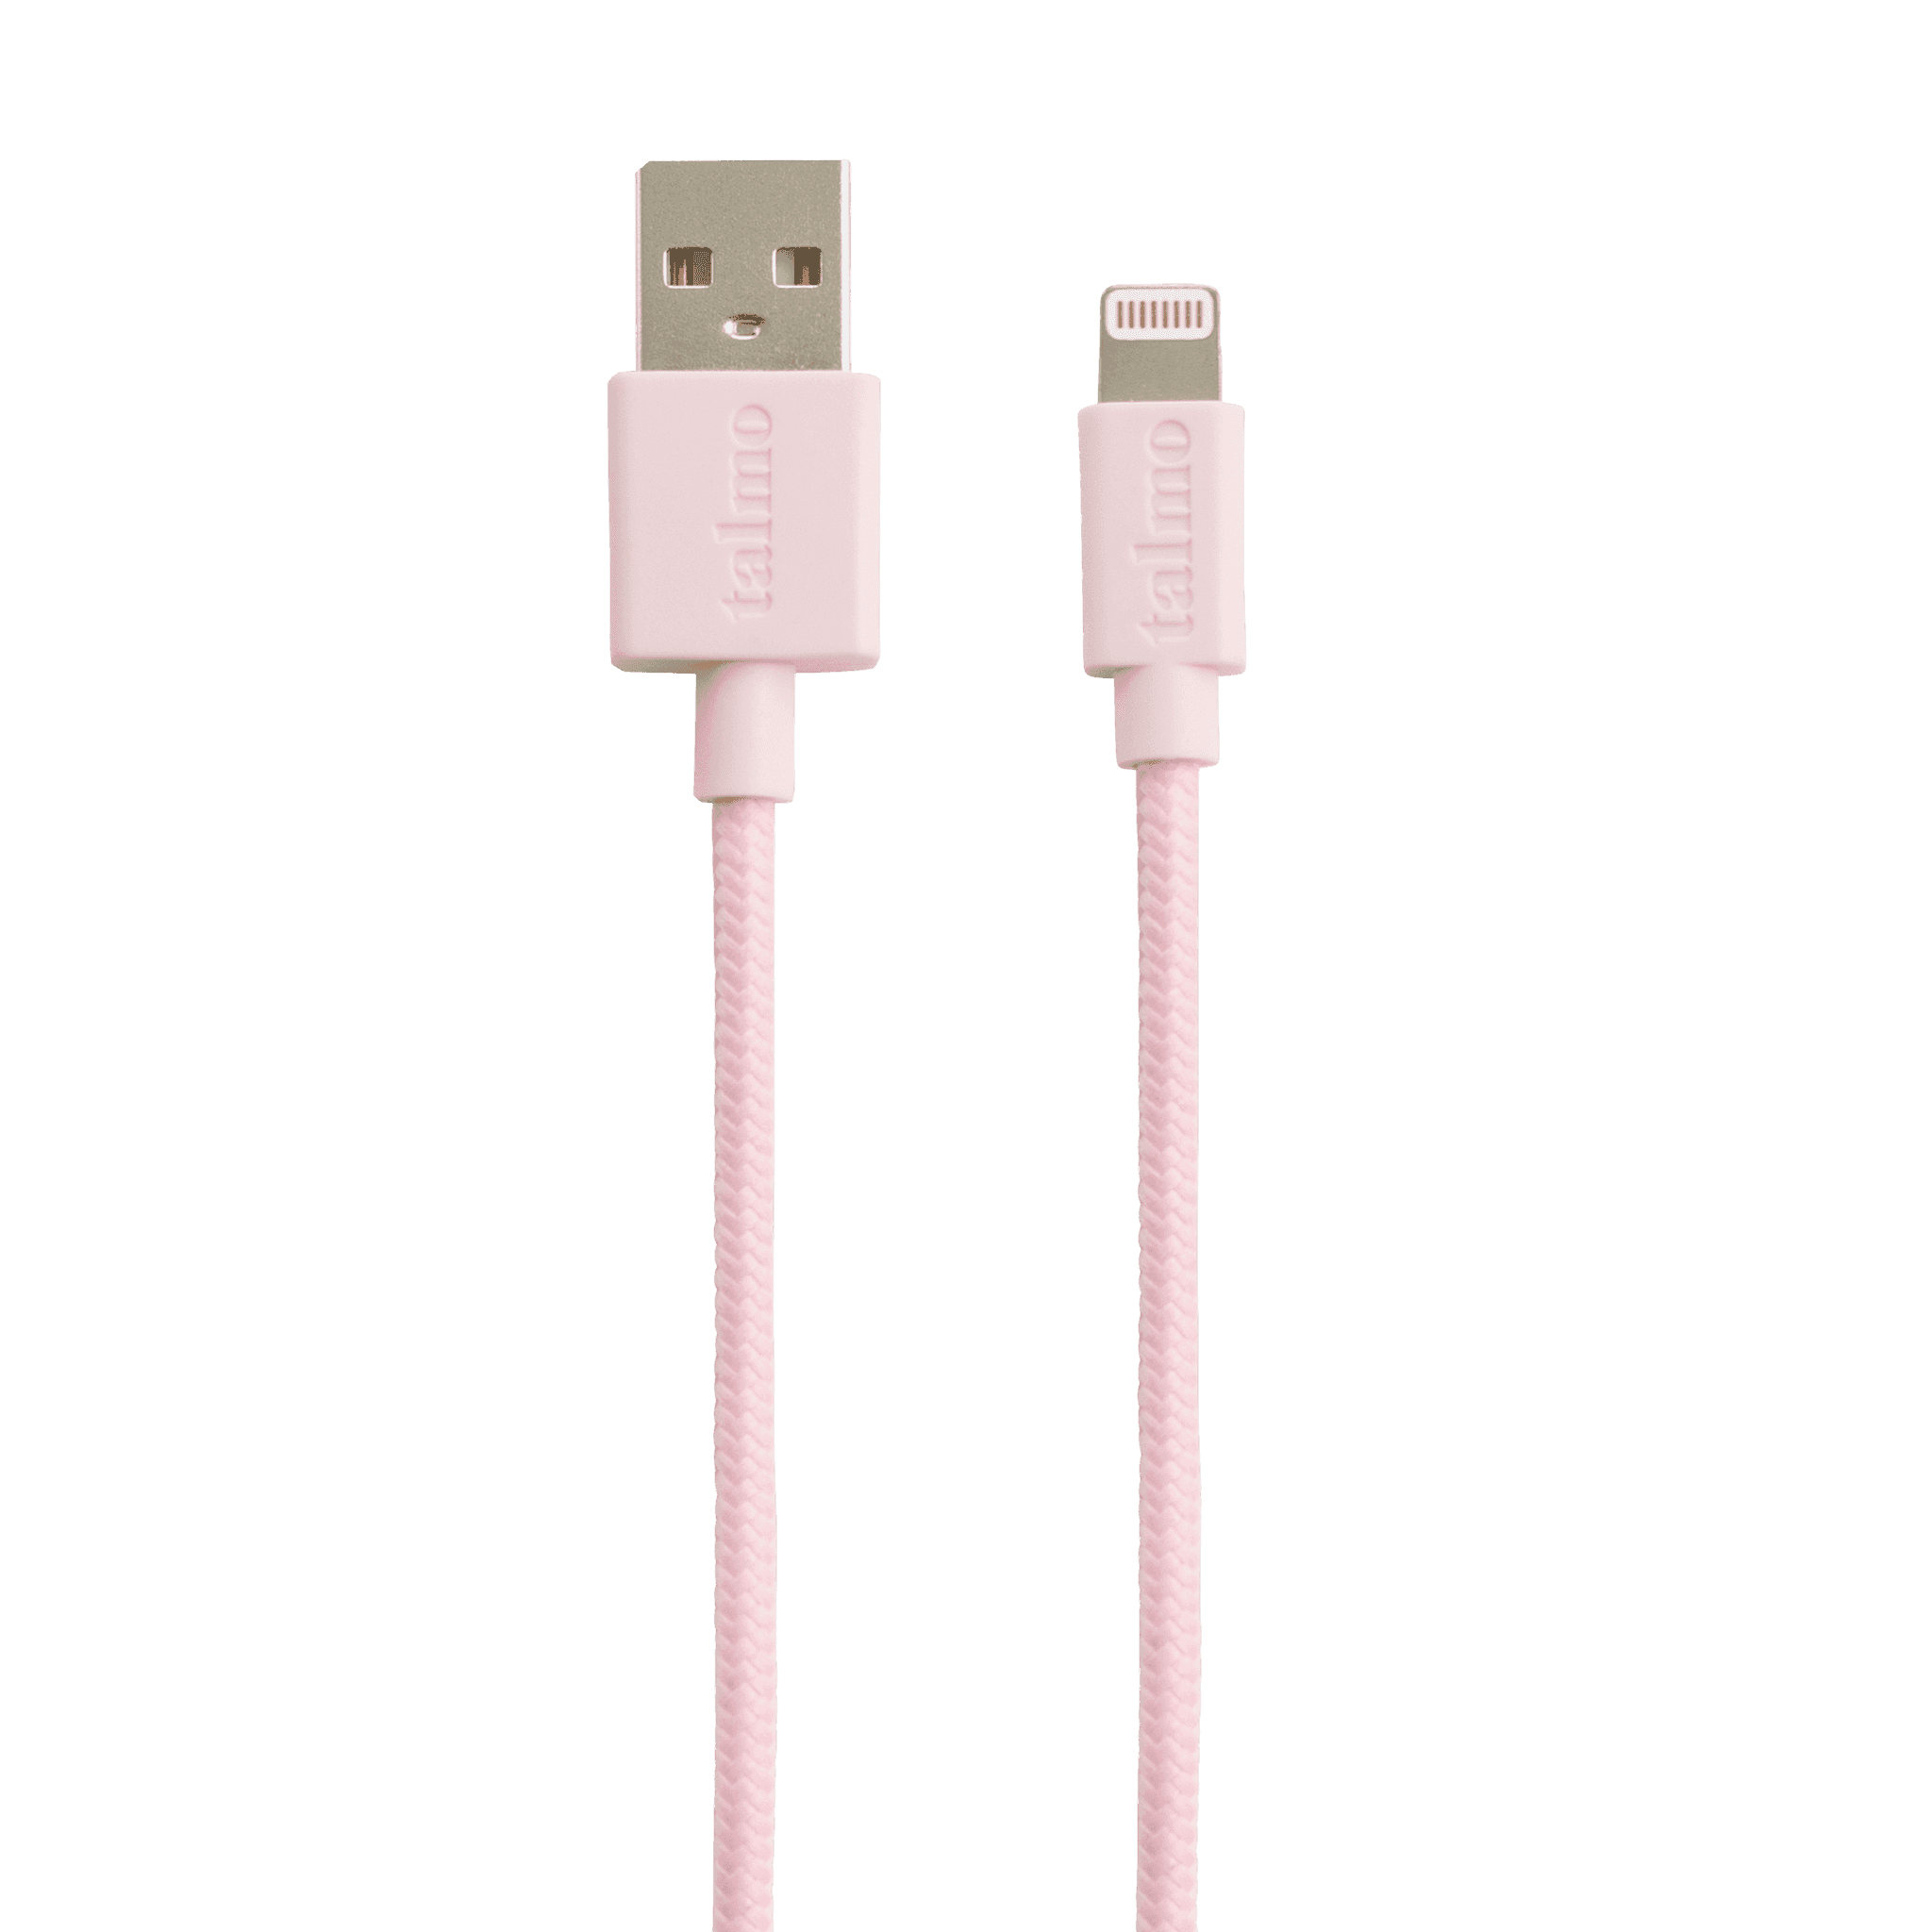 iPhone Cable in Bubblegum Pink 4xPack